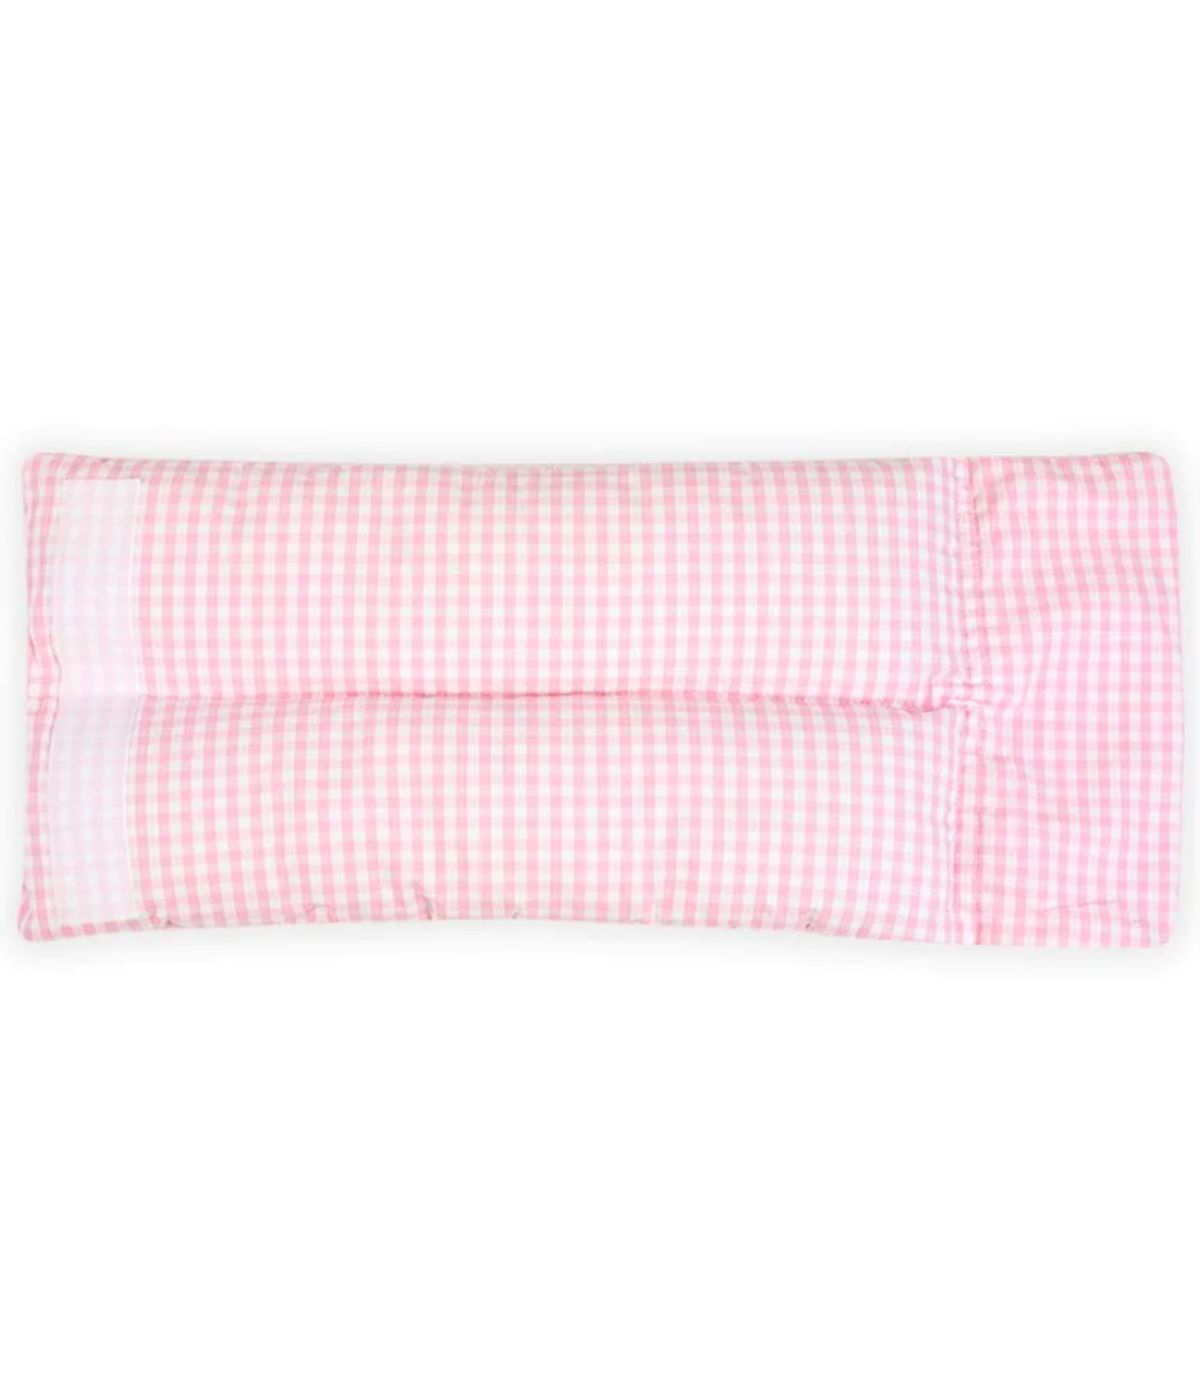 Poppy Pink Comfy Cradle Pink/White